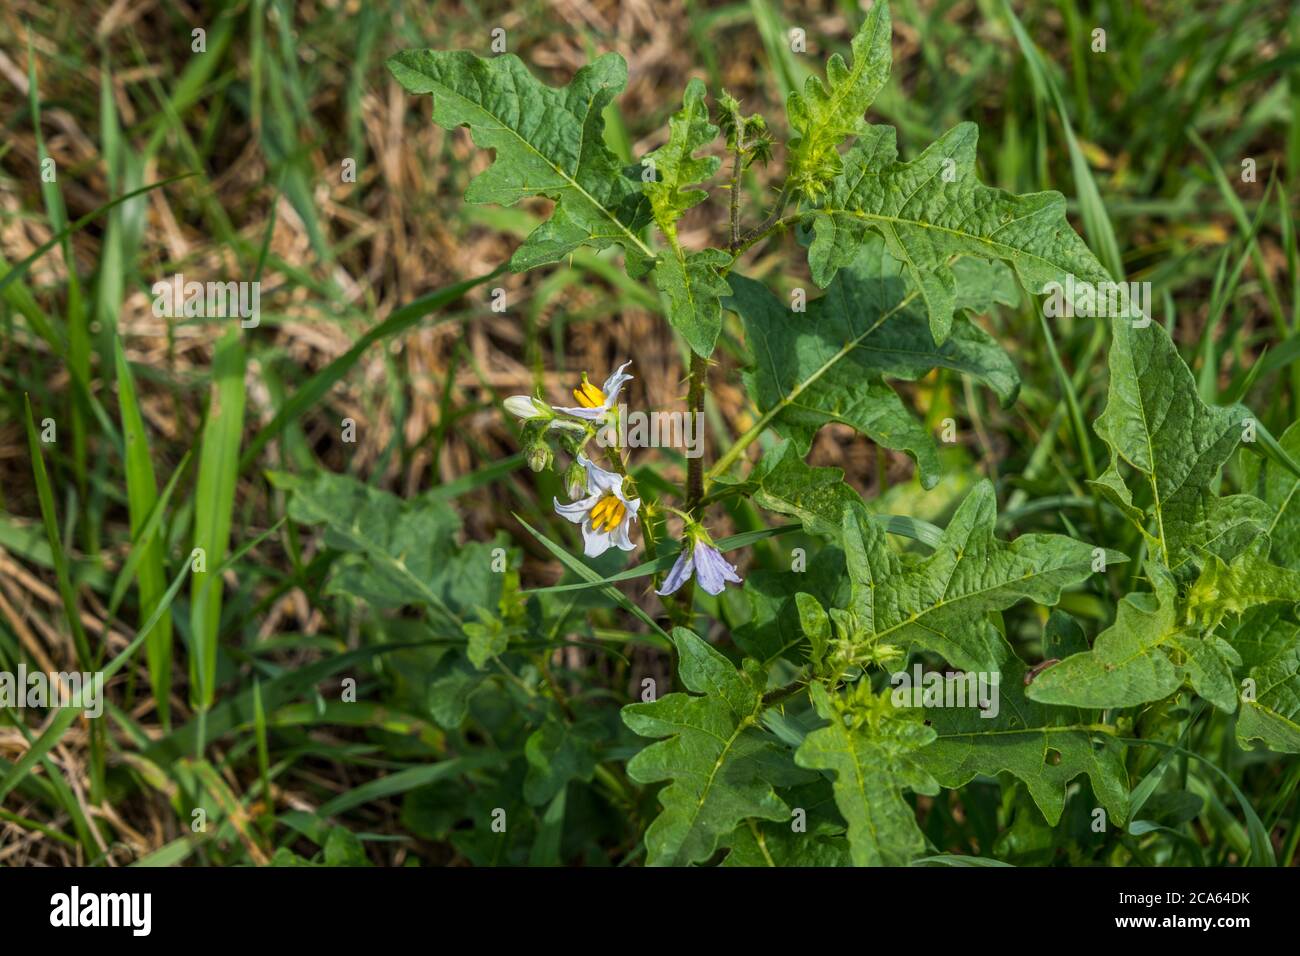 Horse nettle plant with white star shaped flowers and thorns on the stems an invasive species growing in a field on a sunny day in summertime Stock Photo